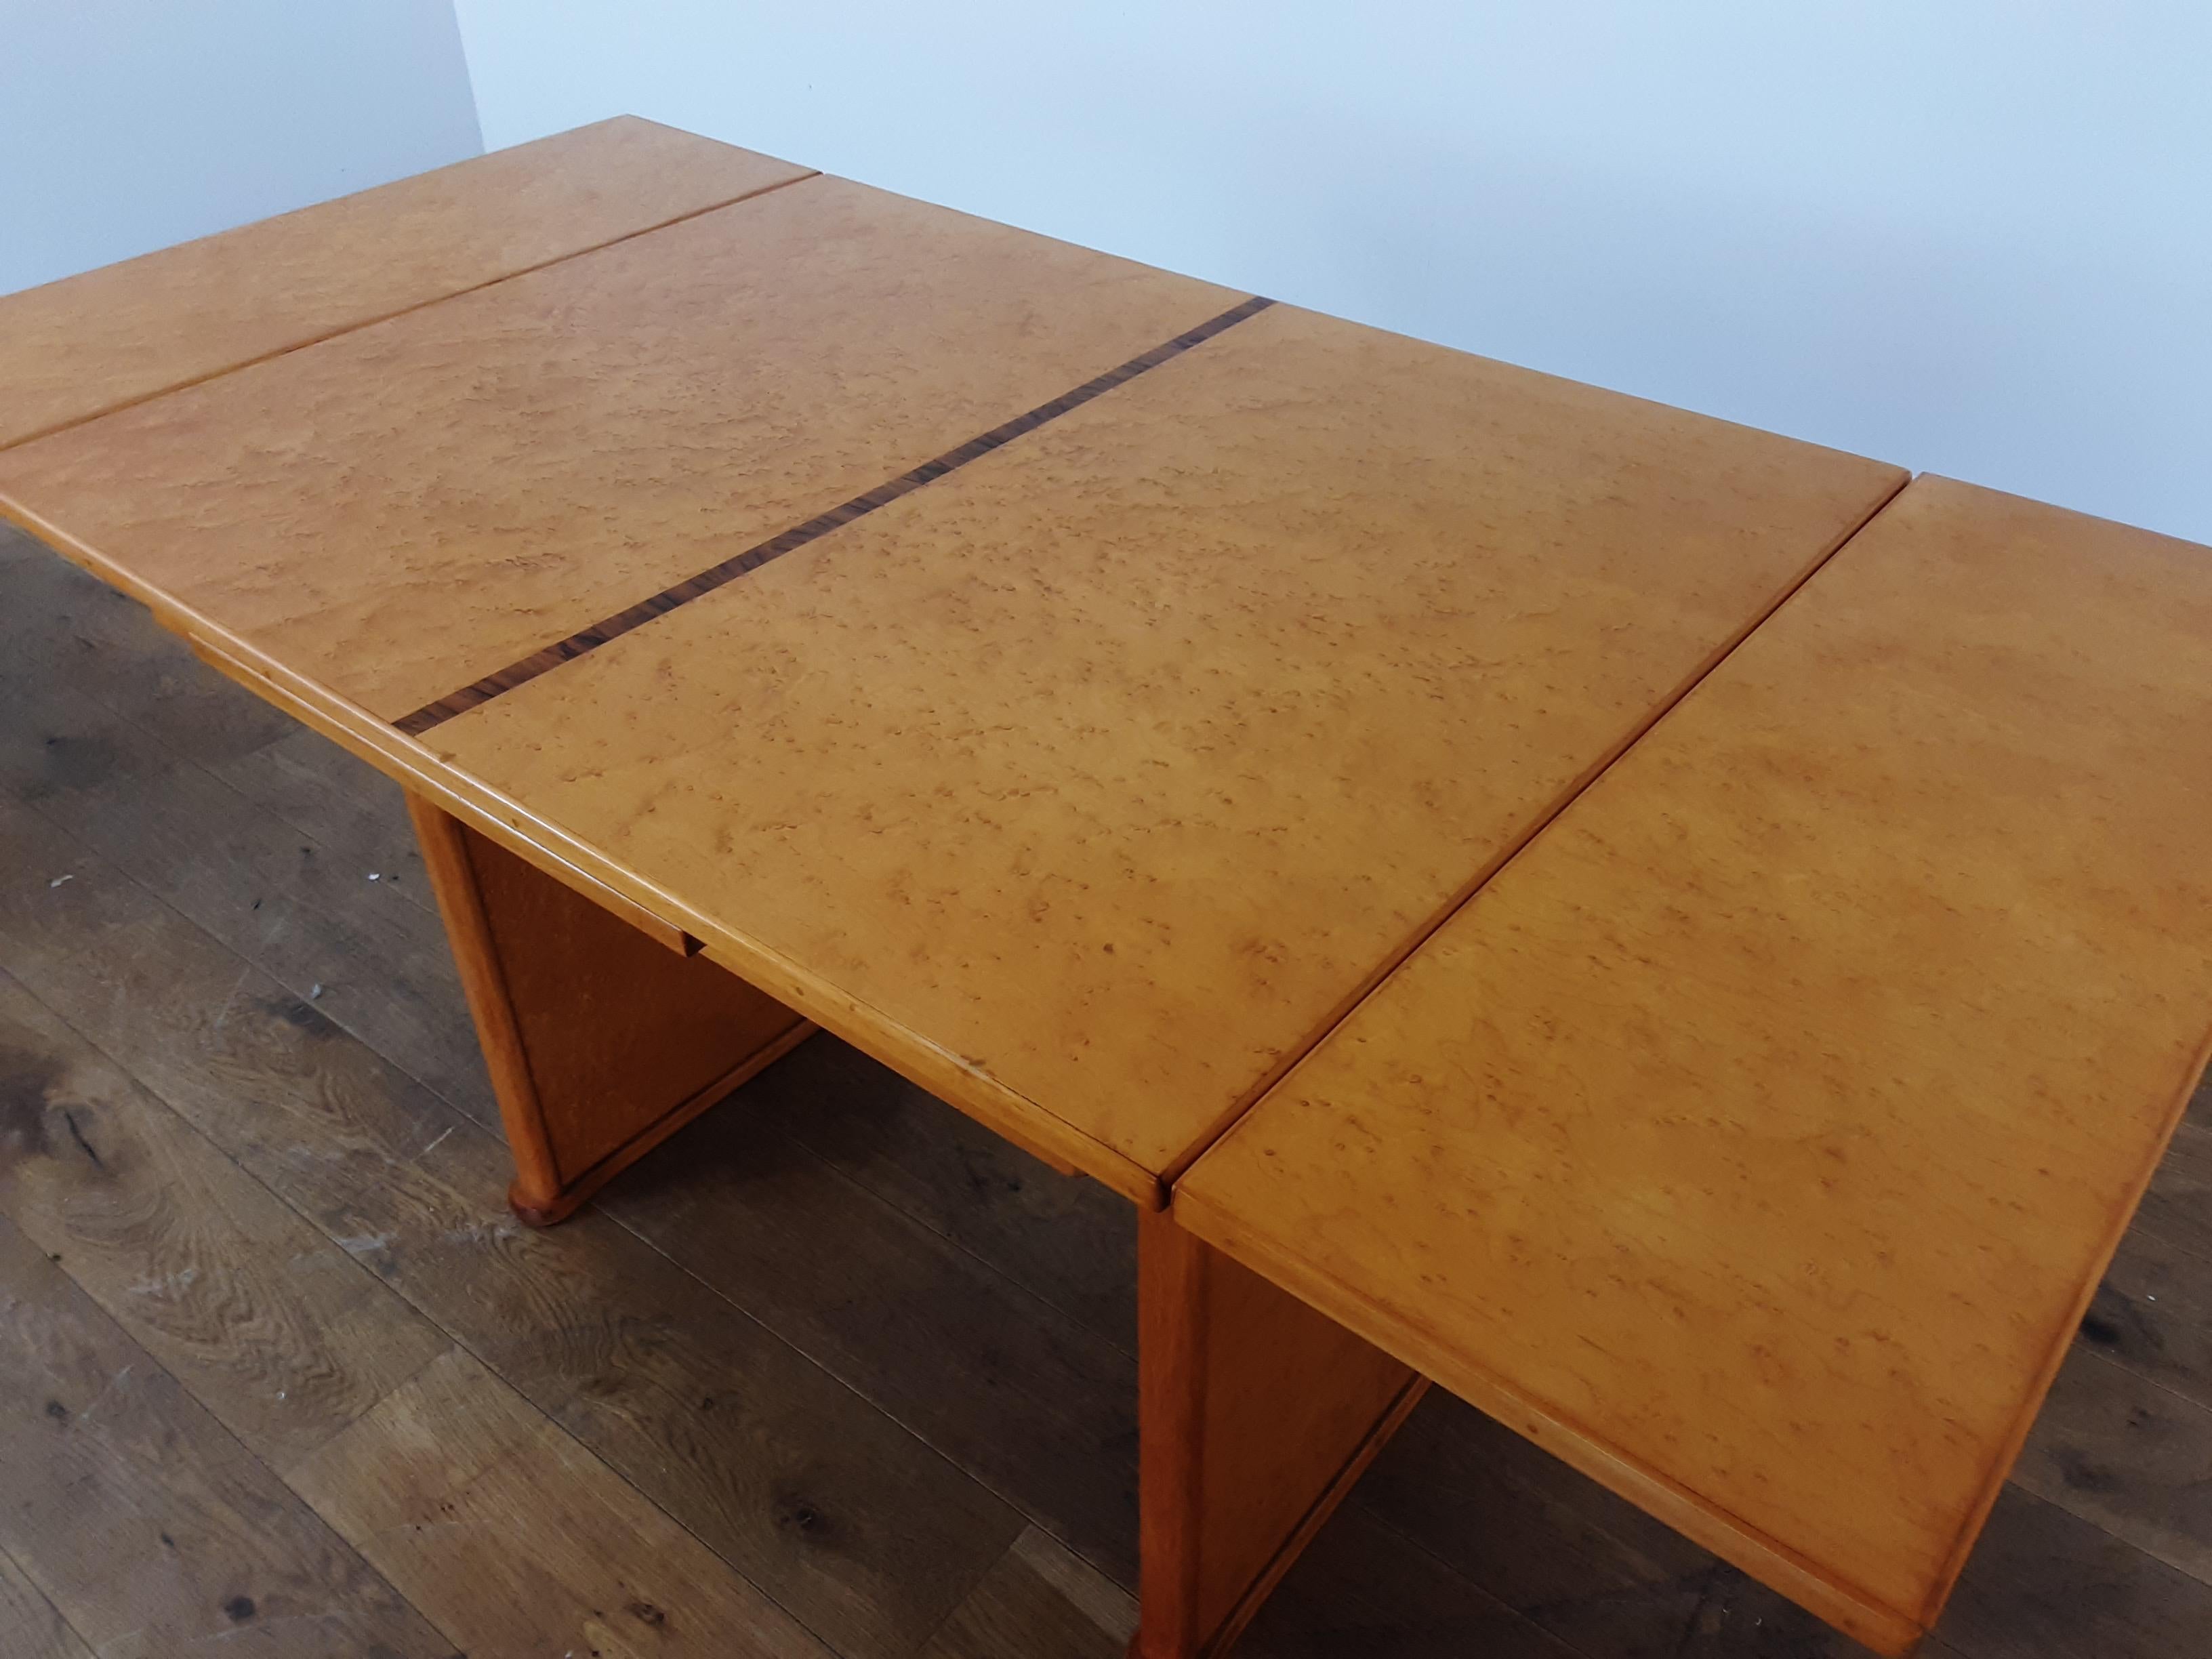 British Art Deco Extendable Dining Table in Bird's-Eye Maple with Walnut Trims For Sale 6